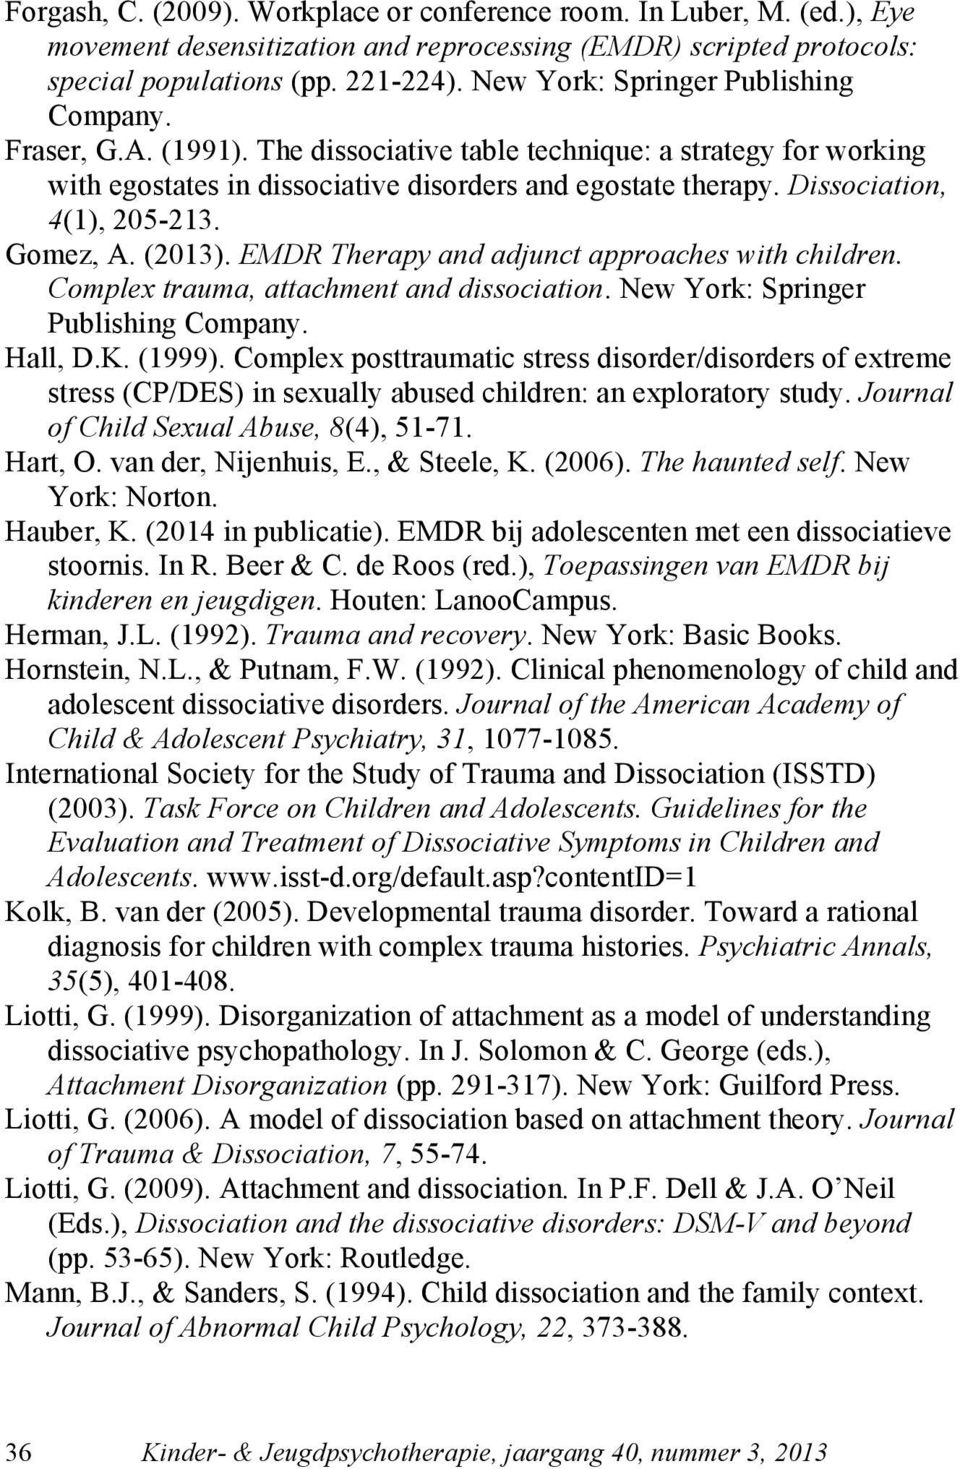 Dissociation, 4(1), 205-213. Gomez, A. (2013). EMDR Therapy and adjunct approaches with children. Complex trauma, attachment and dissociation. New York: Springer Publishing Company. Hall, D.K. (1999).